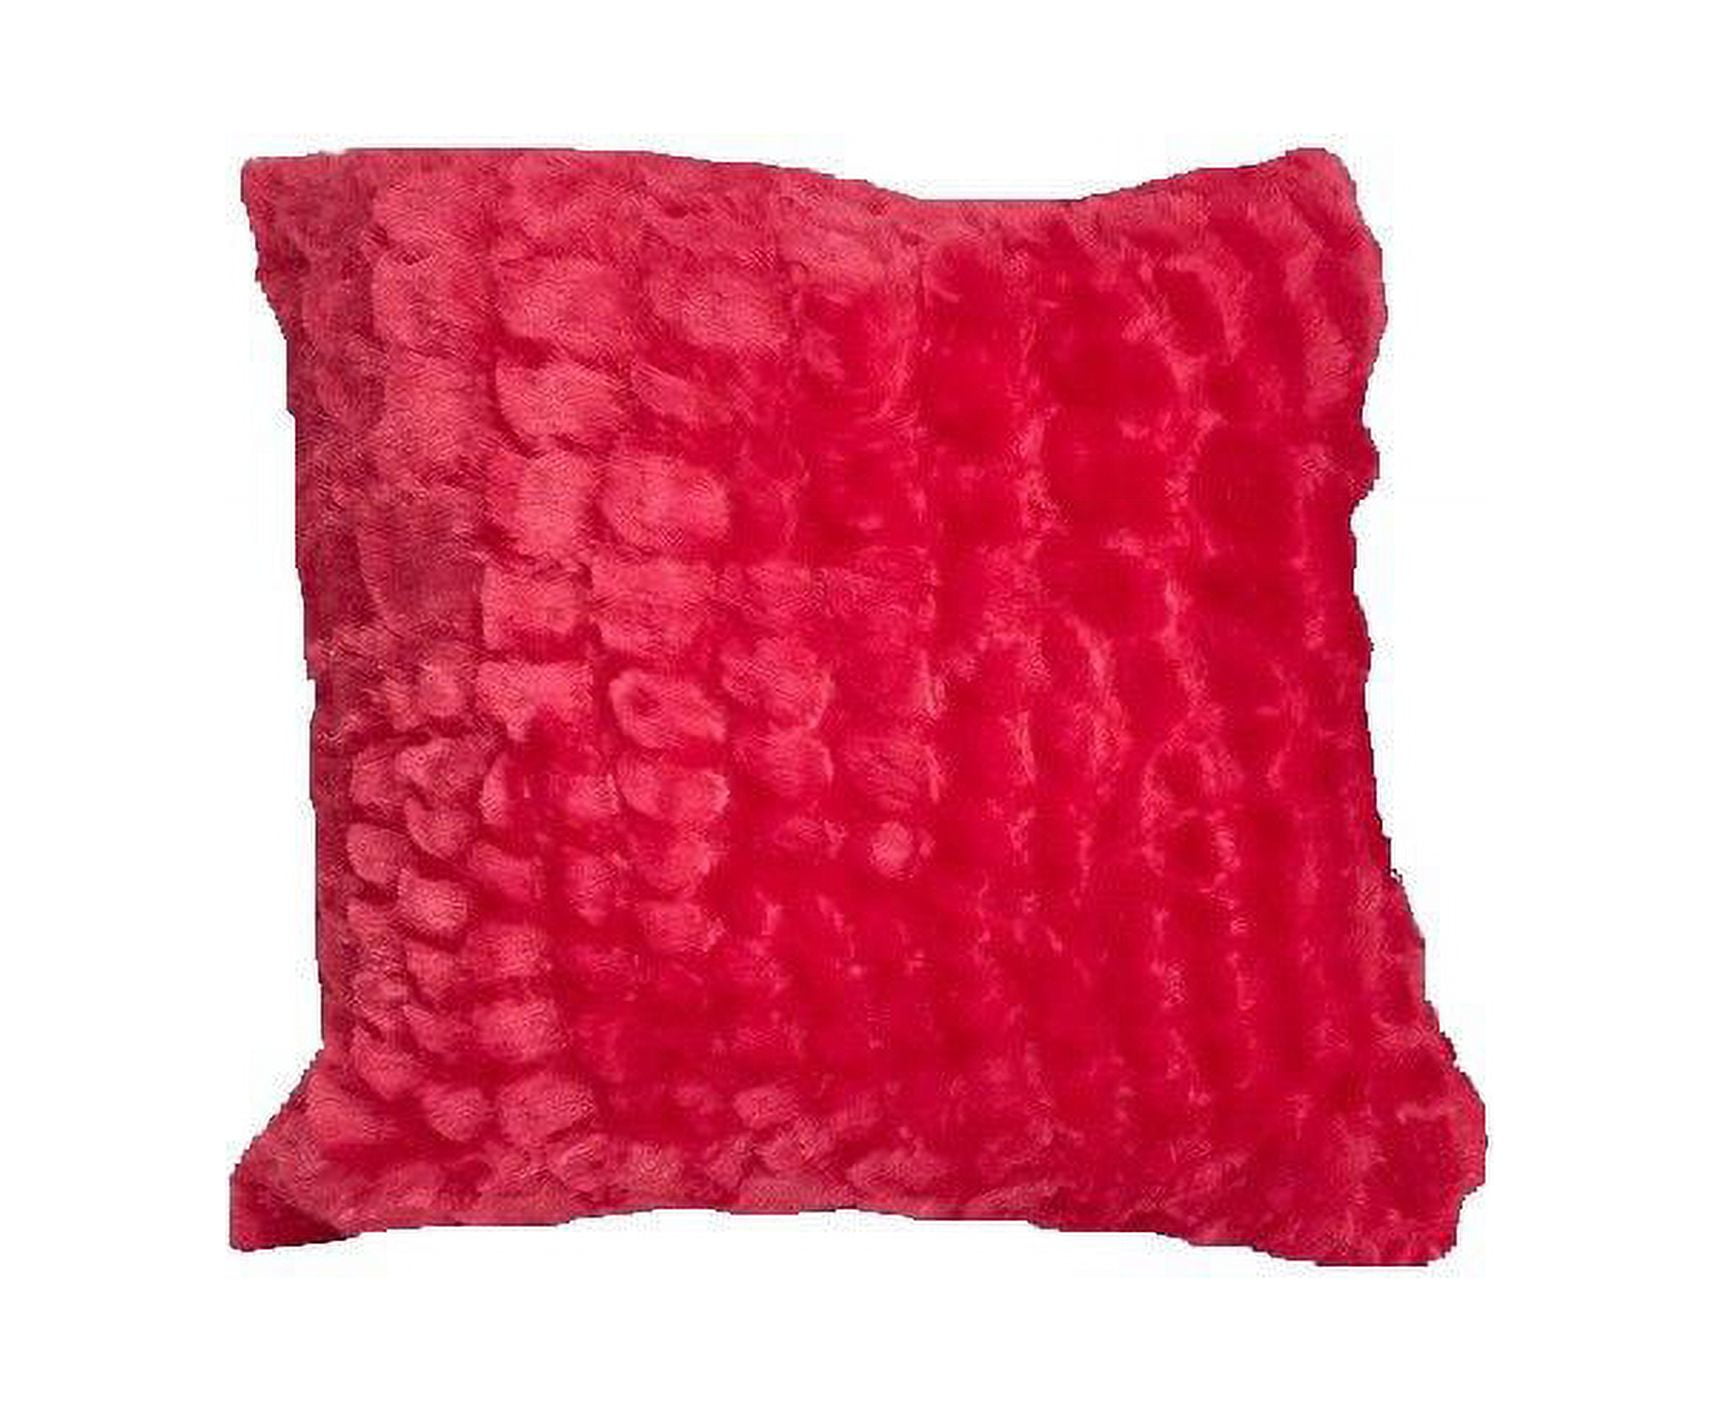 Pillowtex Plush 18'x18' Throw Pillow with Cover-Coral- from